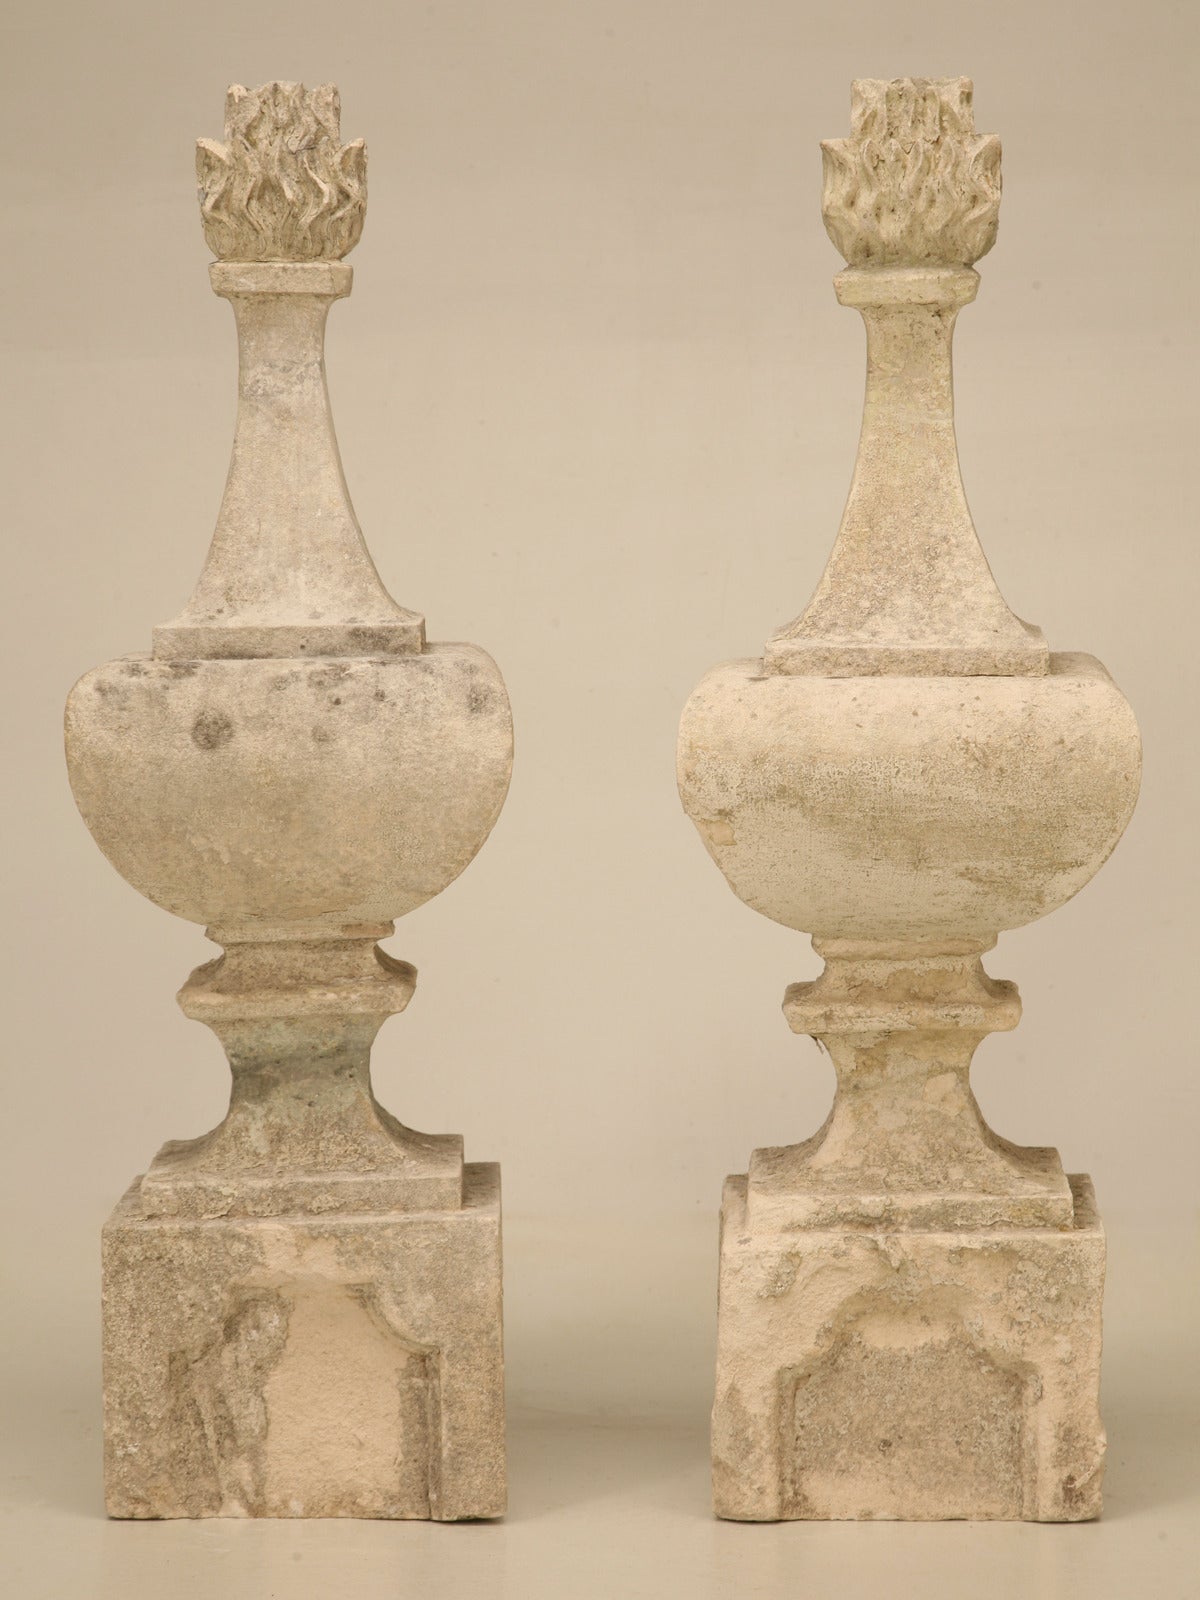 Pair of early 19th century hand-cut stone finials. Originally decorated a fence, rooftop or turrets, this exquisite pair of finials offer a unique flame detail on the tops. Please note previous repairs to the necks that have been professionally done.